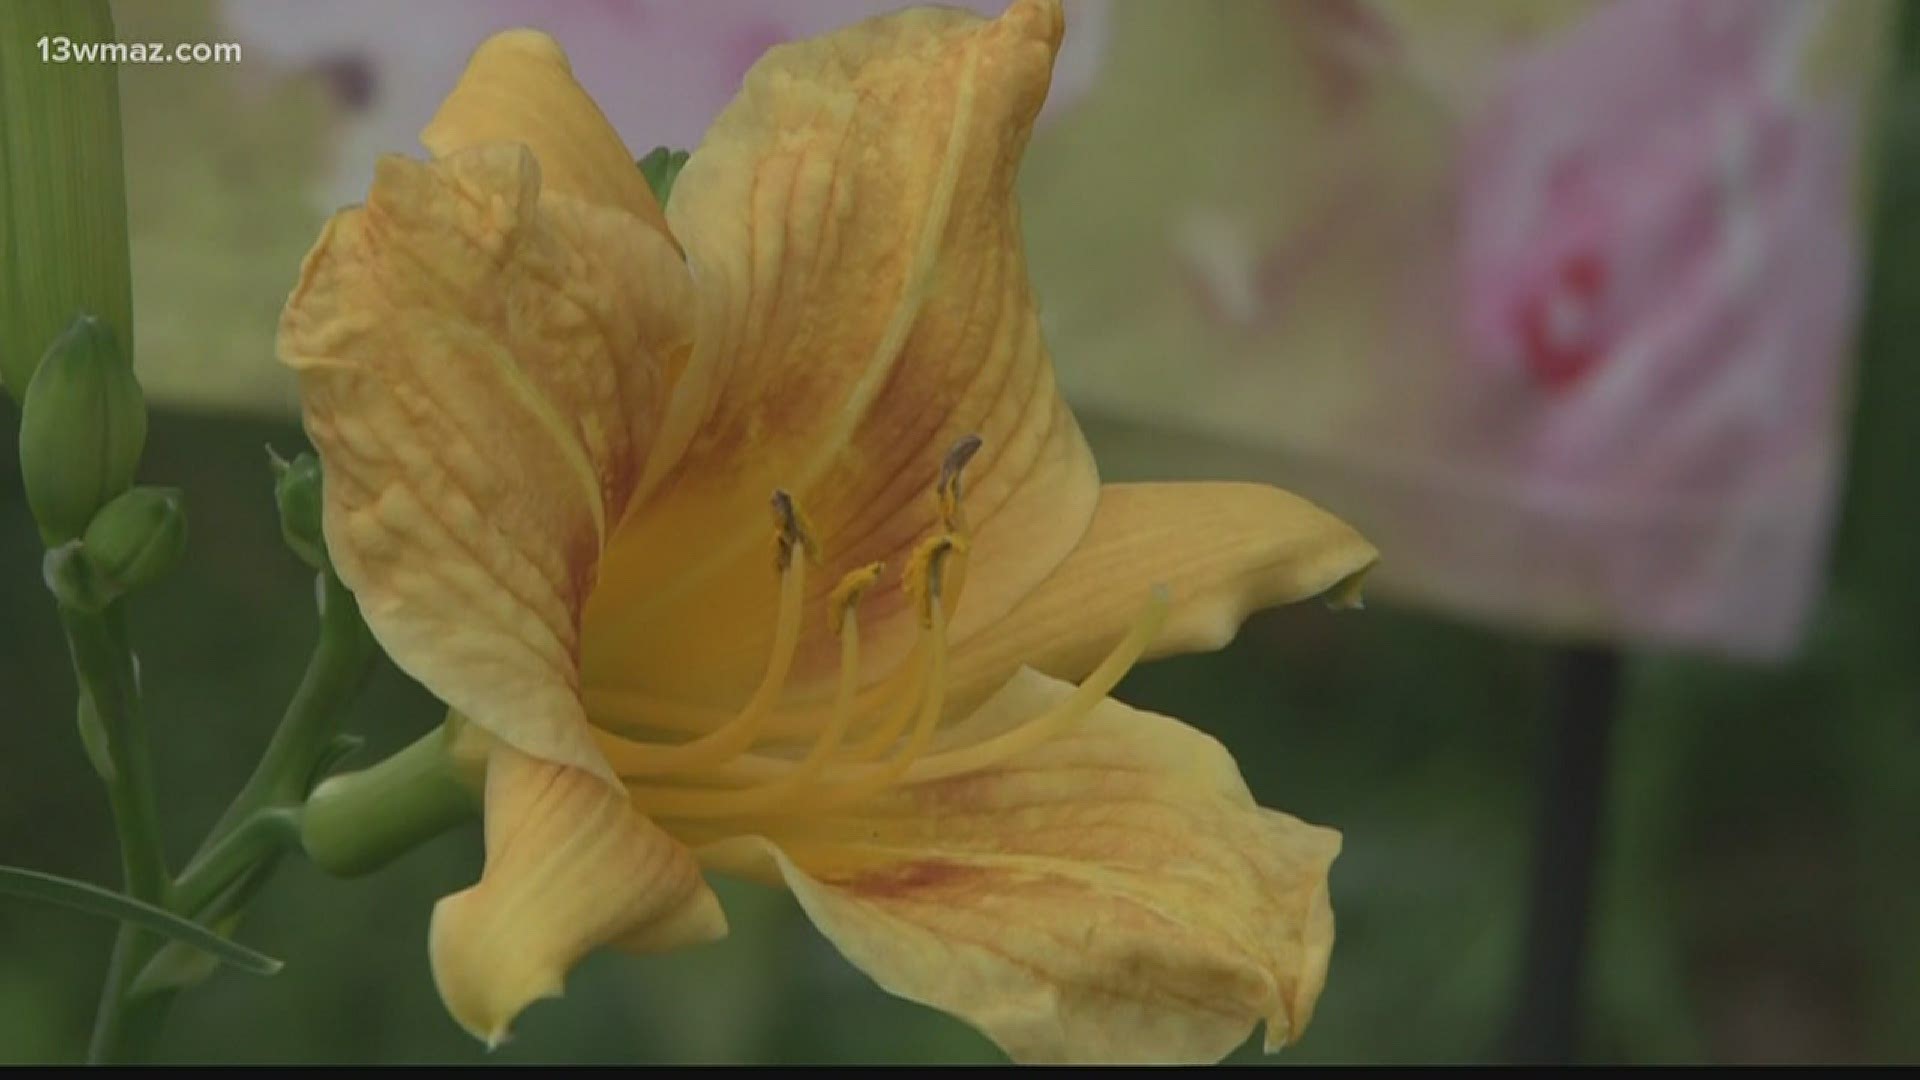 The good rain we got Thursday may have helped your garden out. With extra time on our hands, a lot of folks have turned to gardening as a pastime.